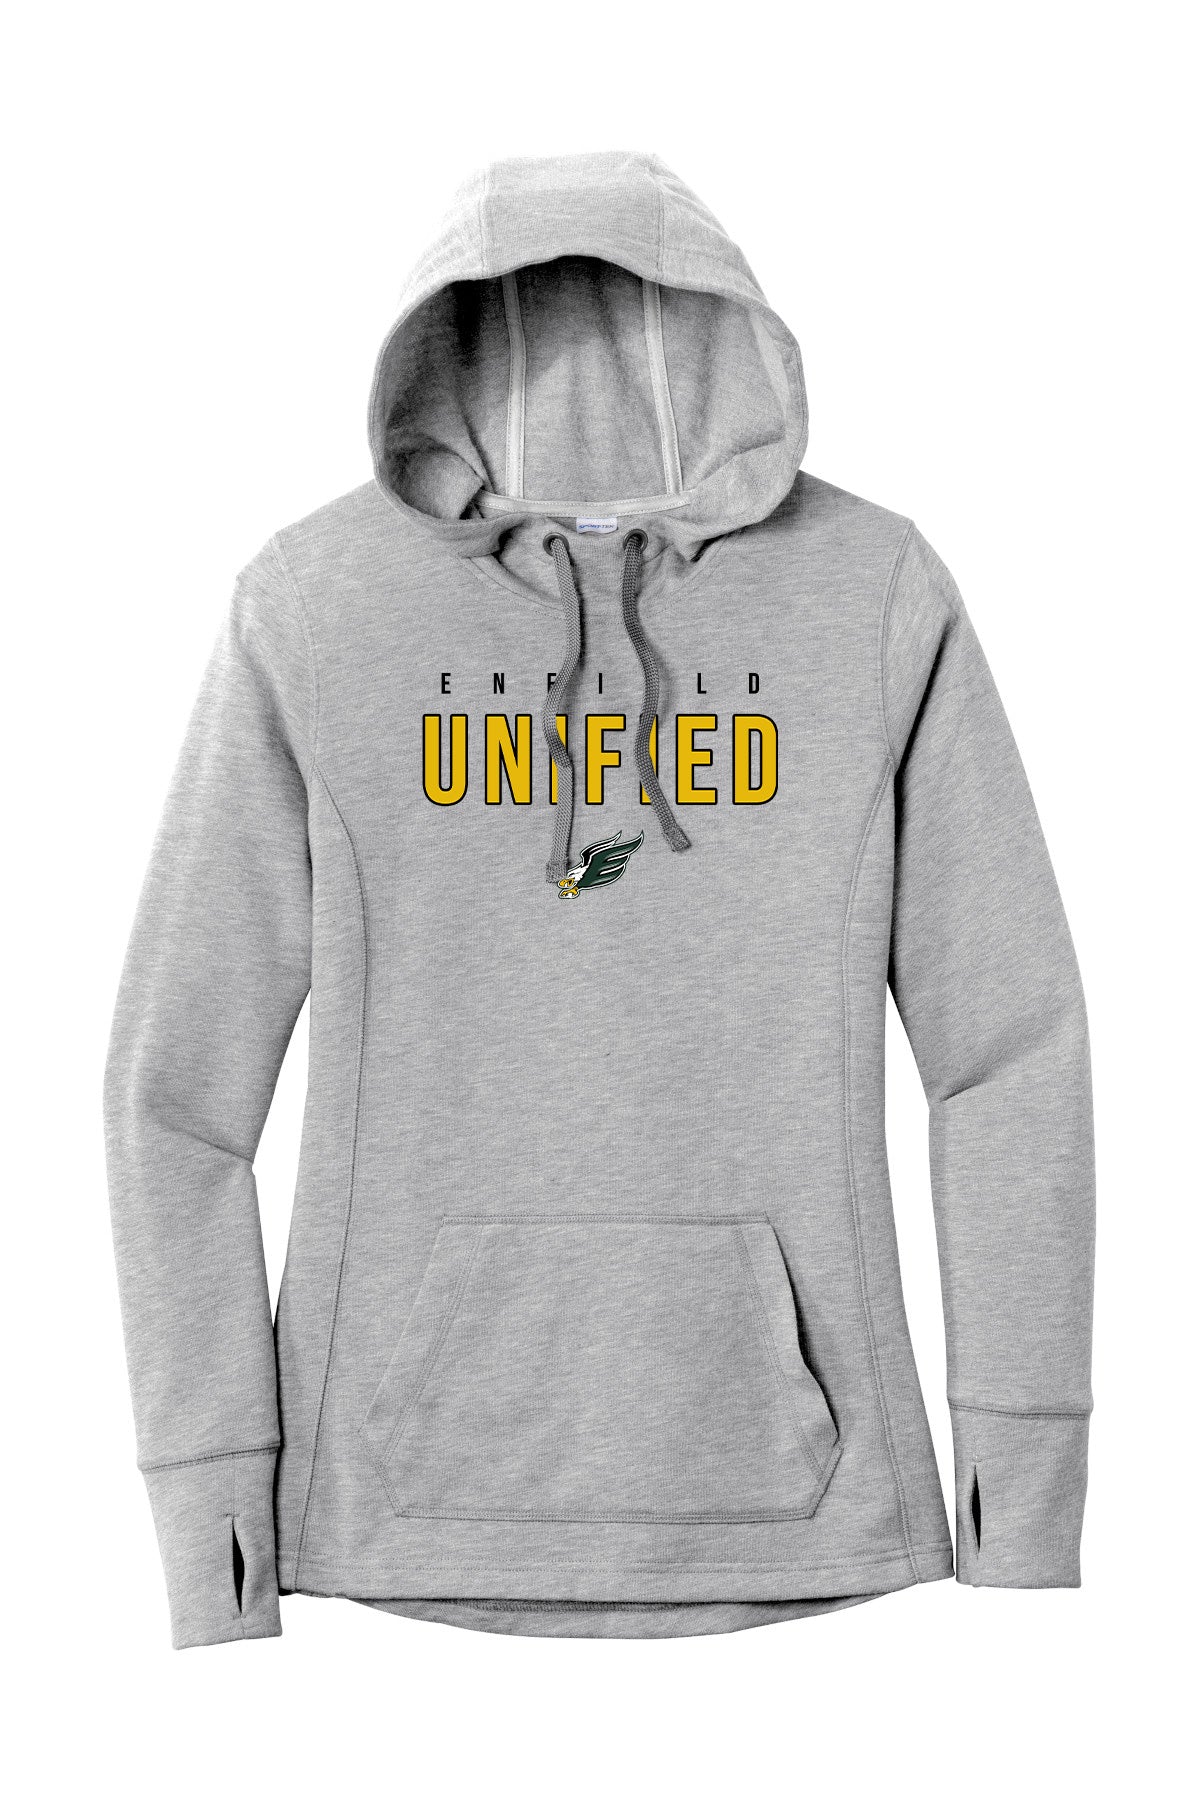 Unified Ladies Tri-blend Hoodie - LST296 (color options available)